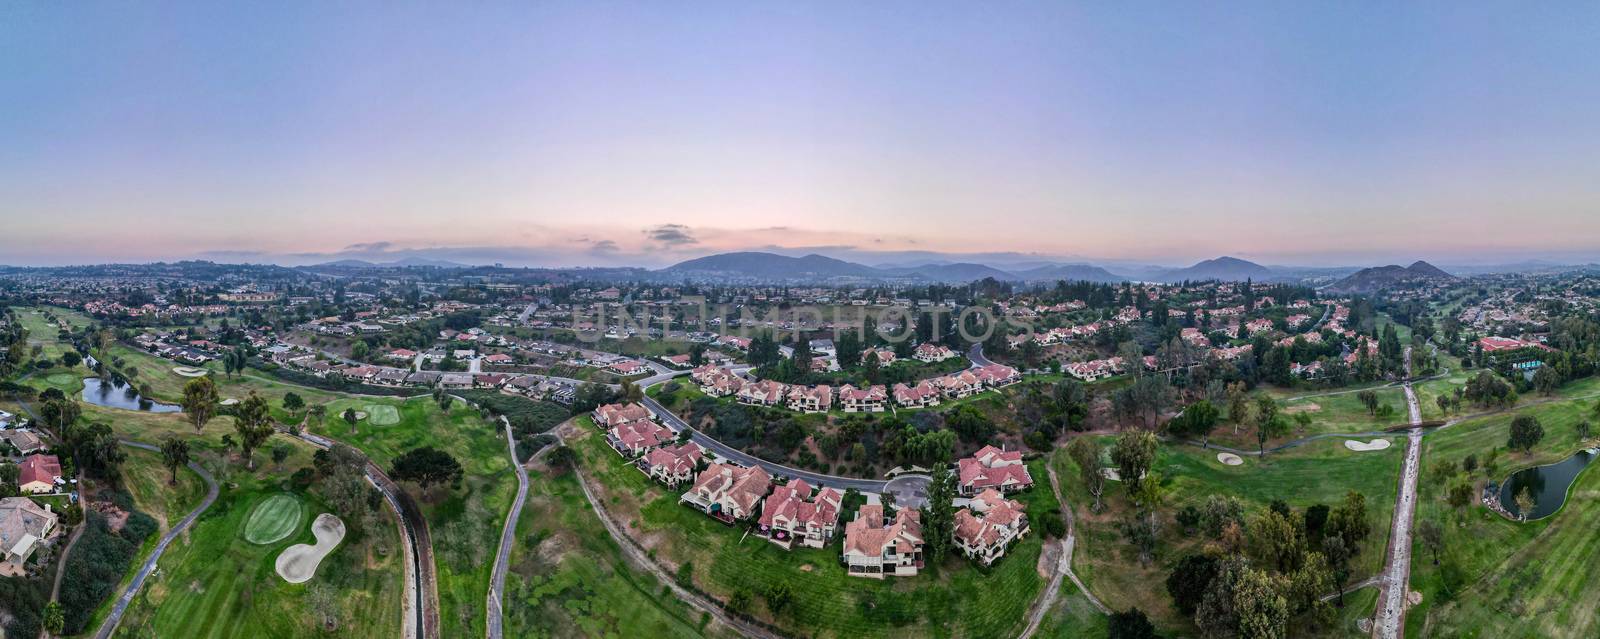 Aerial panoramic view of golf in upscale residential neighborhood during sunset by Bonandbon